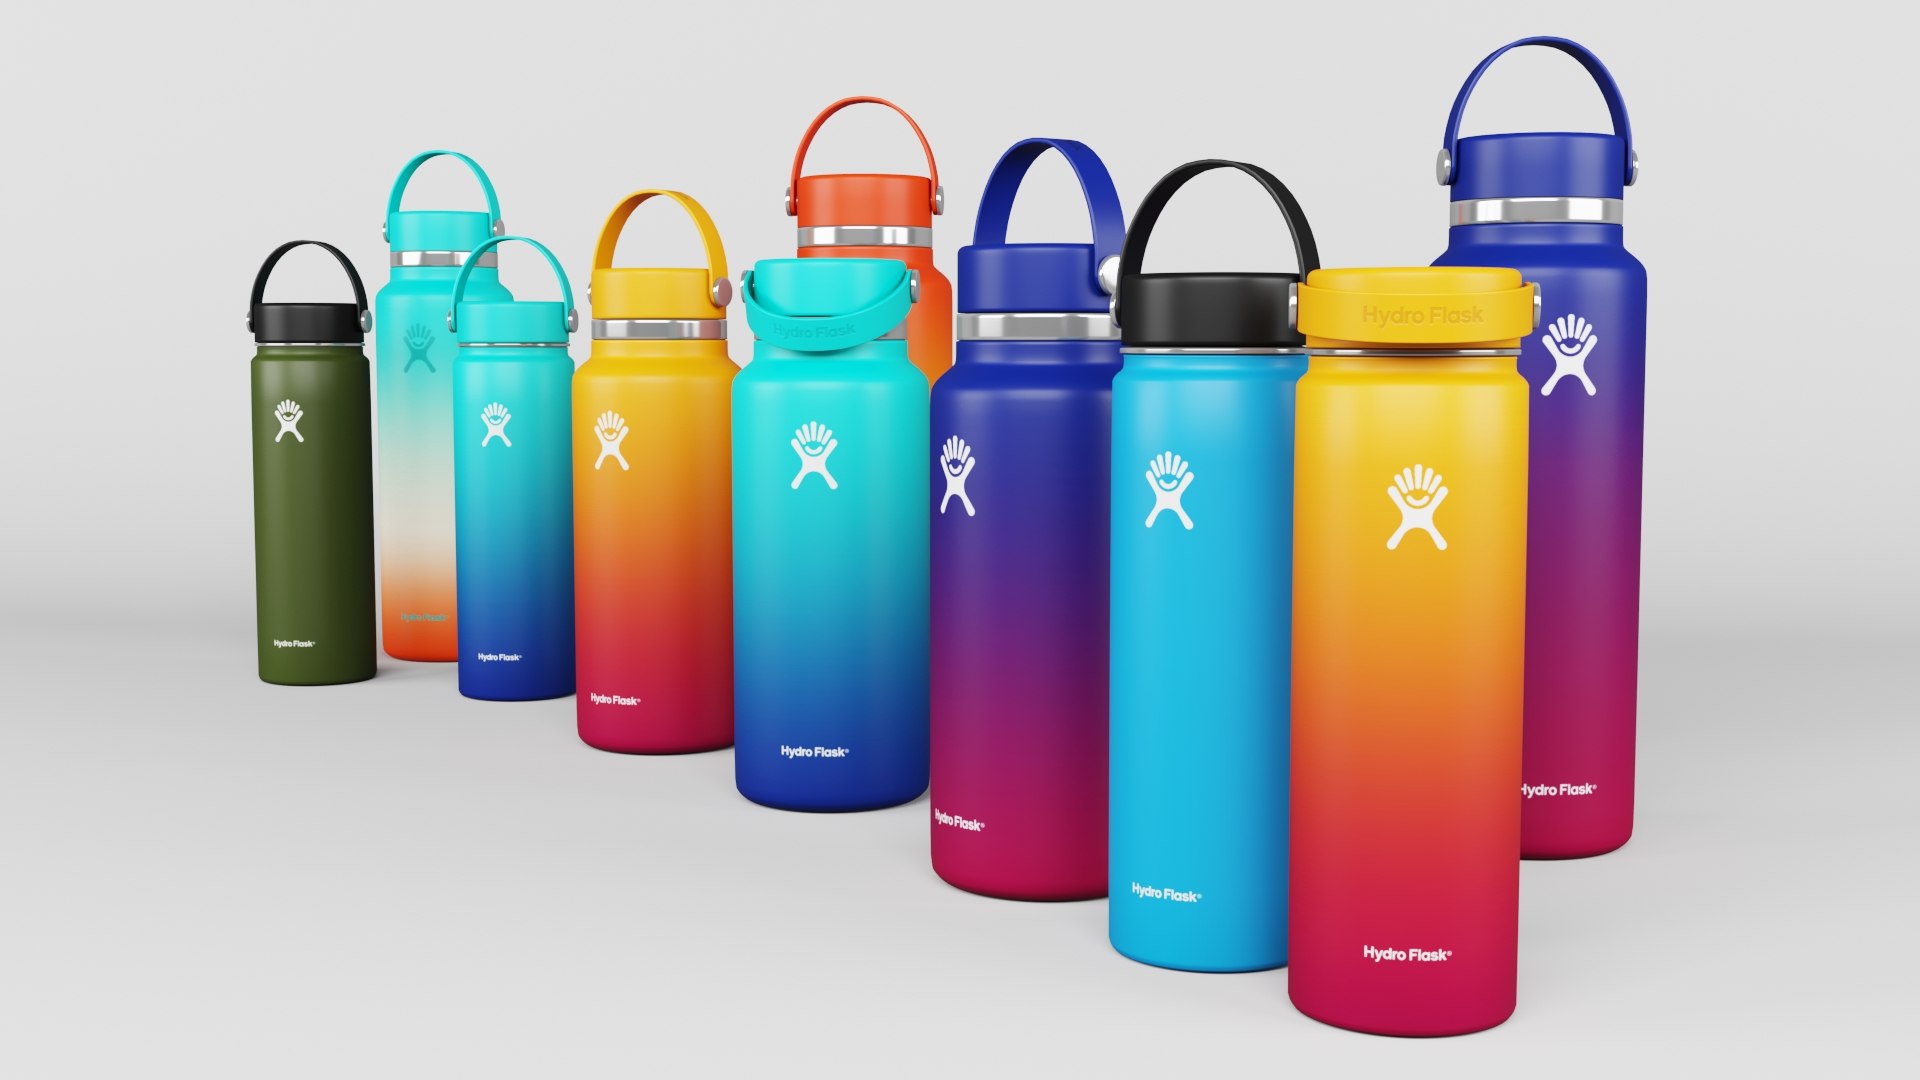 Hydro Flask Singapore - Food is always better with great companies